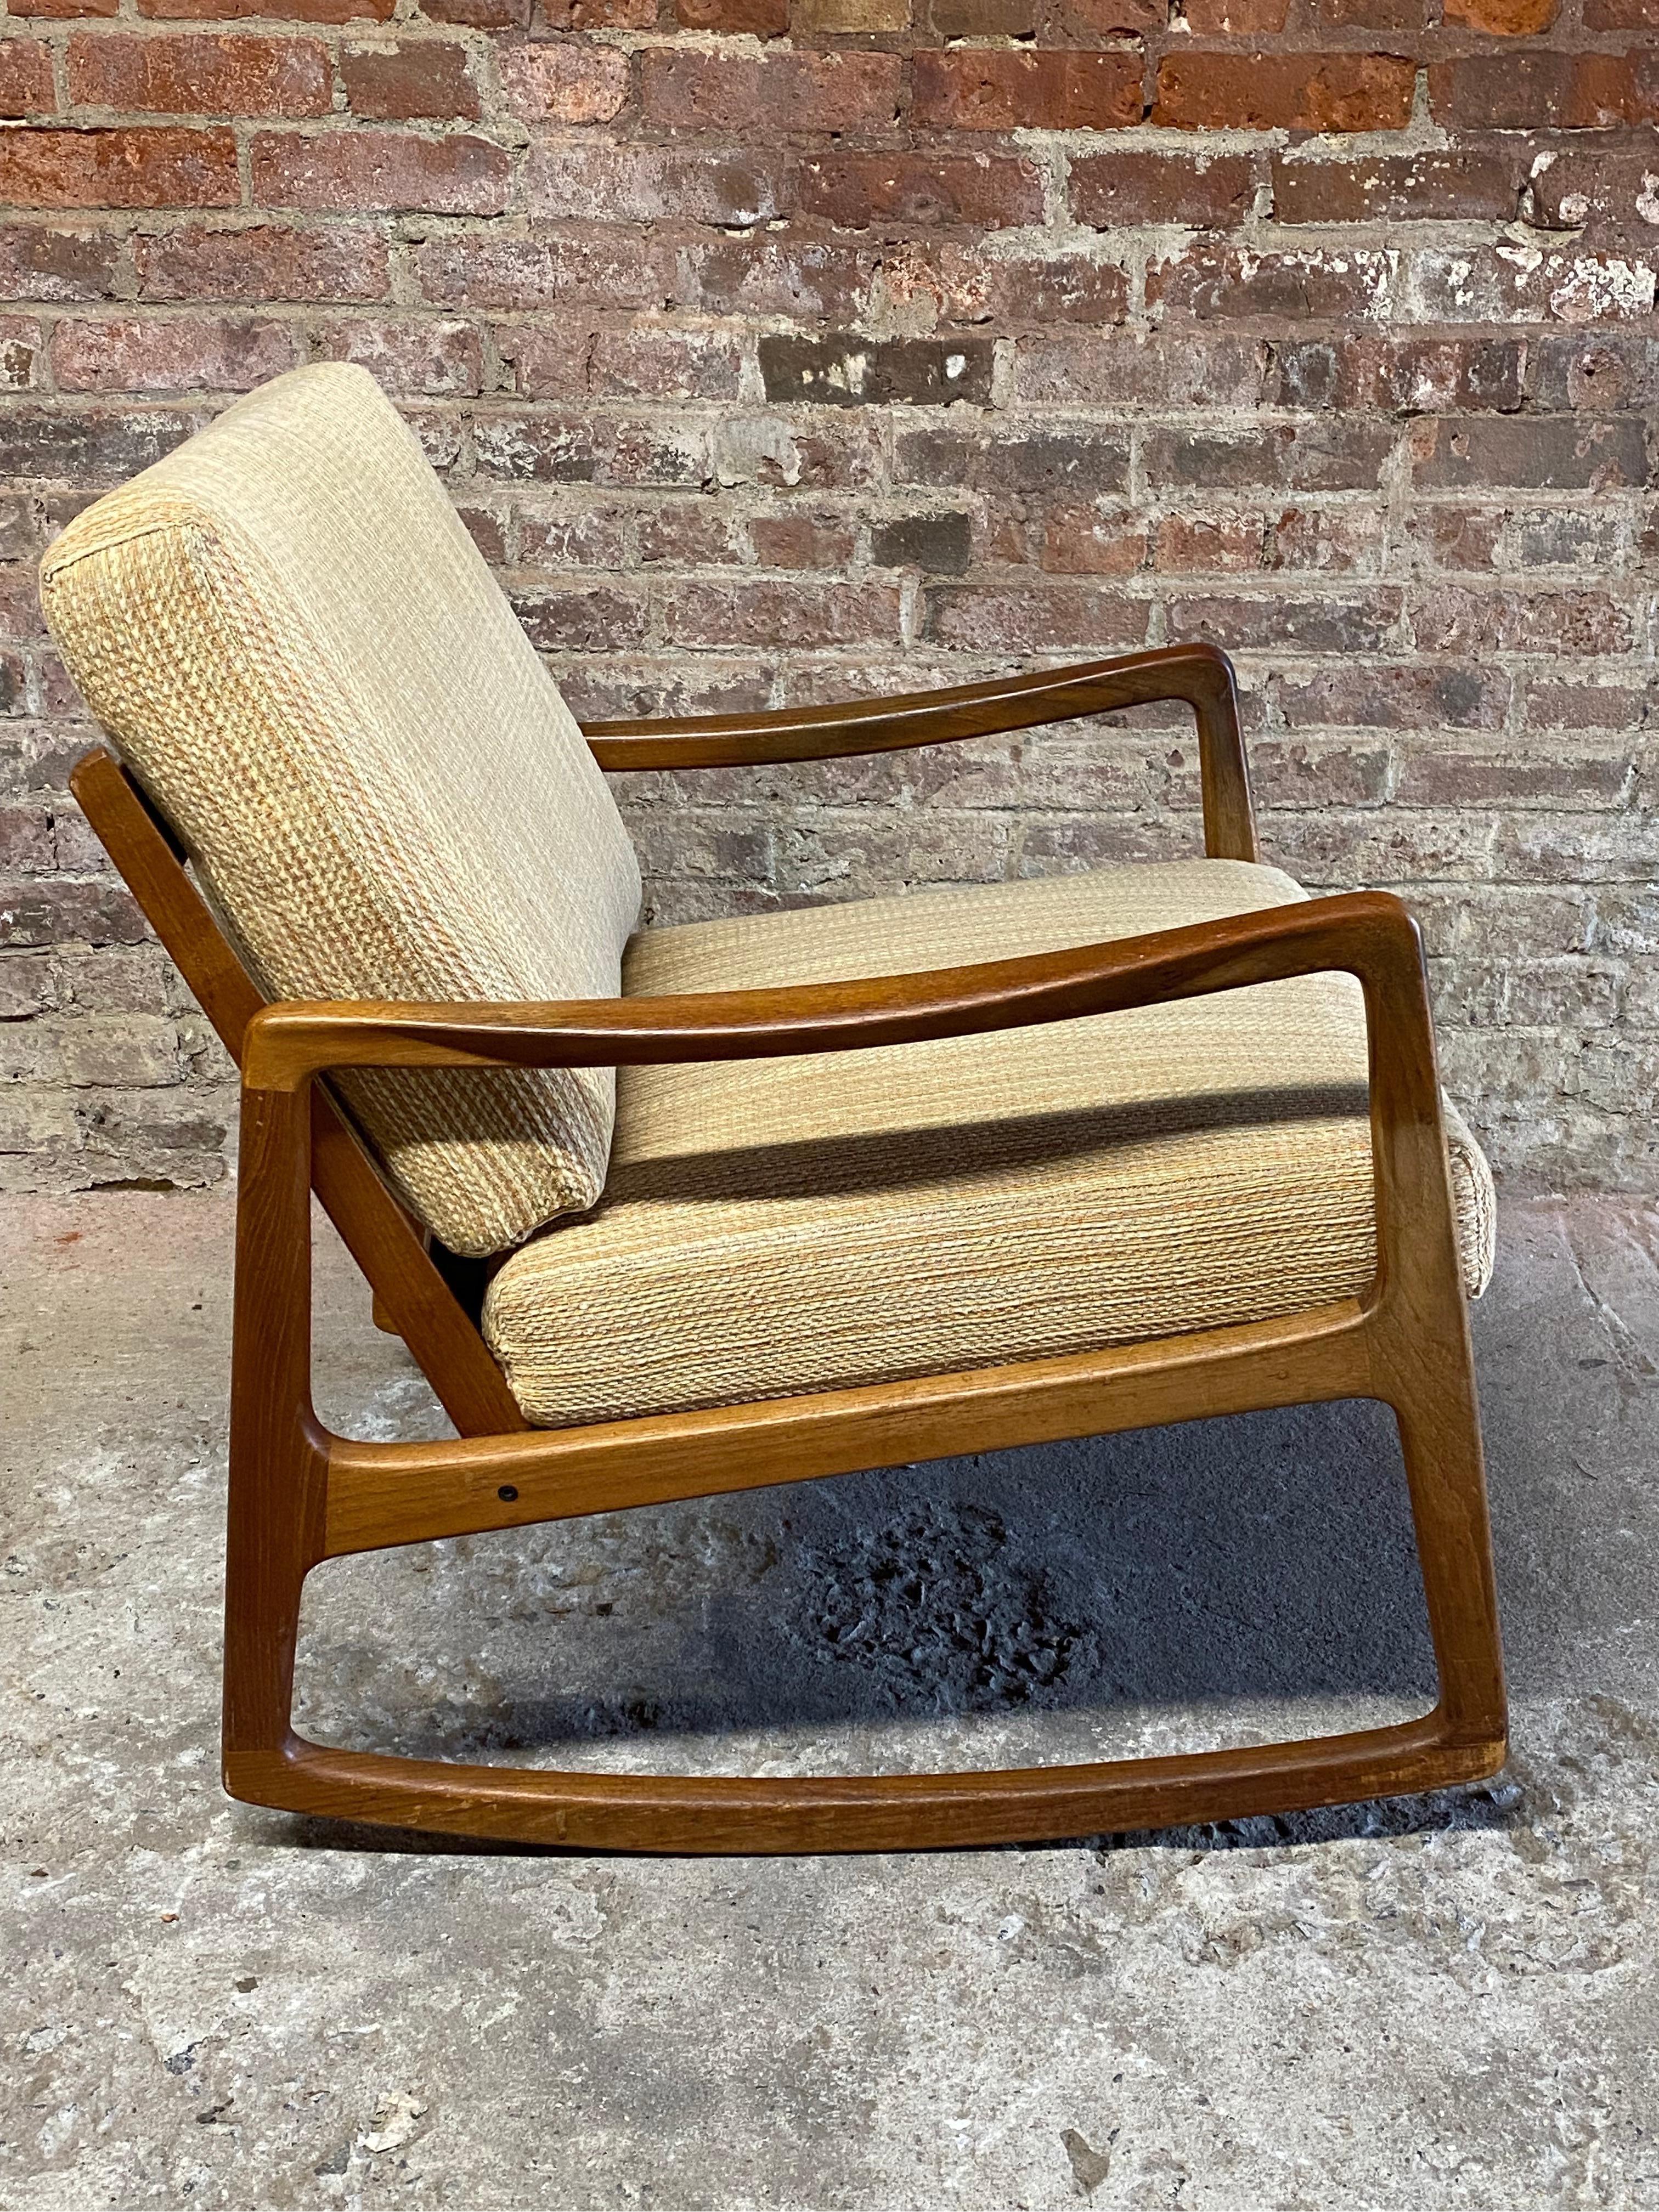 Ole Wanscher Danish Modern Model 120 rocking chair. Circa 1960-70. Solid teak frame. Retains the France and Sons button. Heavy neutral colored upholstery. 

Structurally sound and sturdy construction. Original finish and cushions.

Approximate